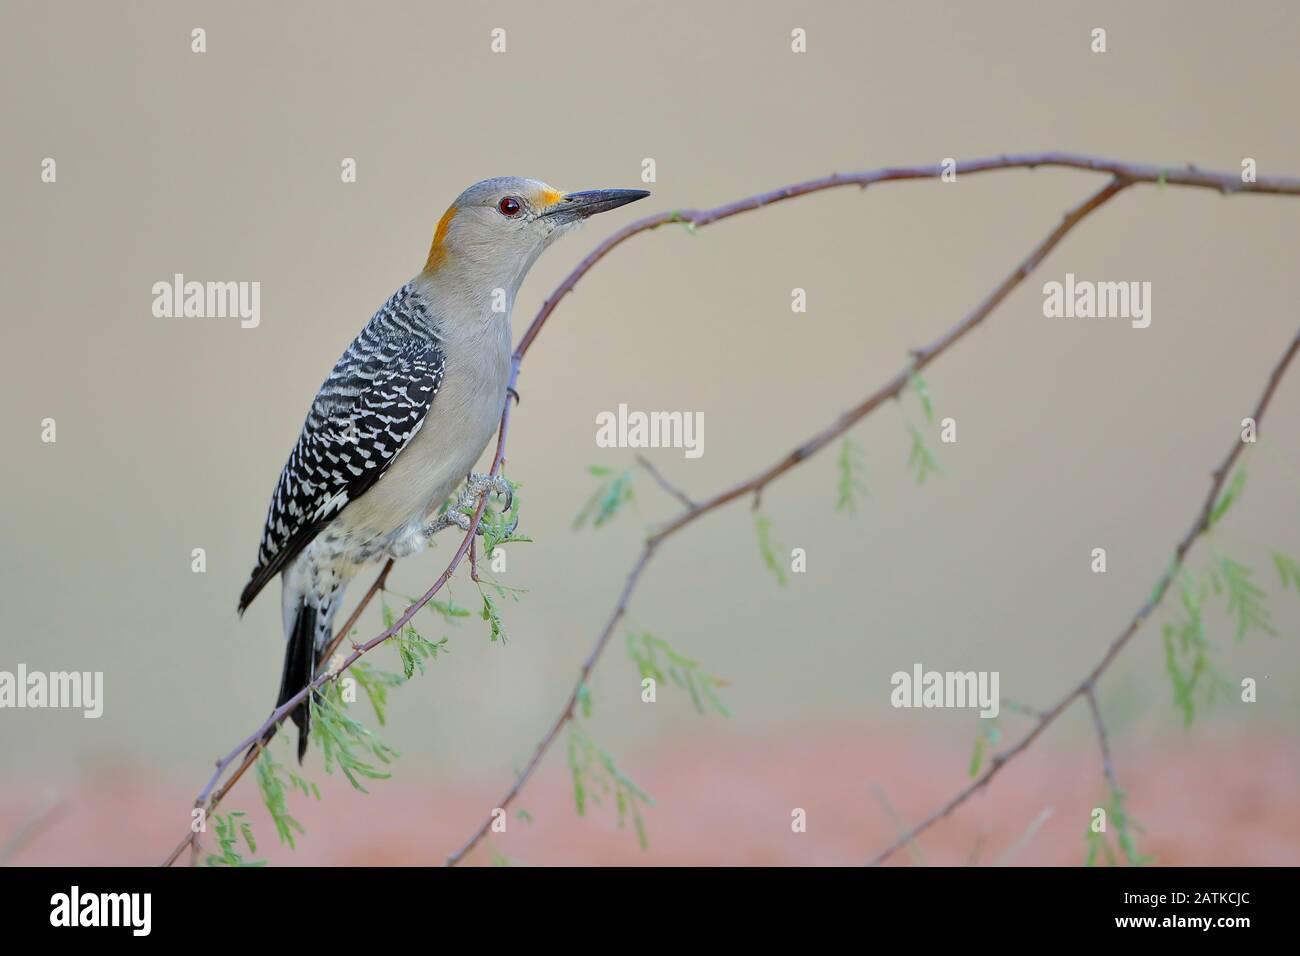 Golden-fronted Woodpecker (Melanerpes aurifrons) on branch in South Texas, USA Stock Photo